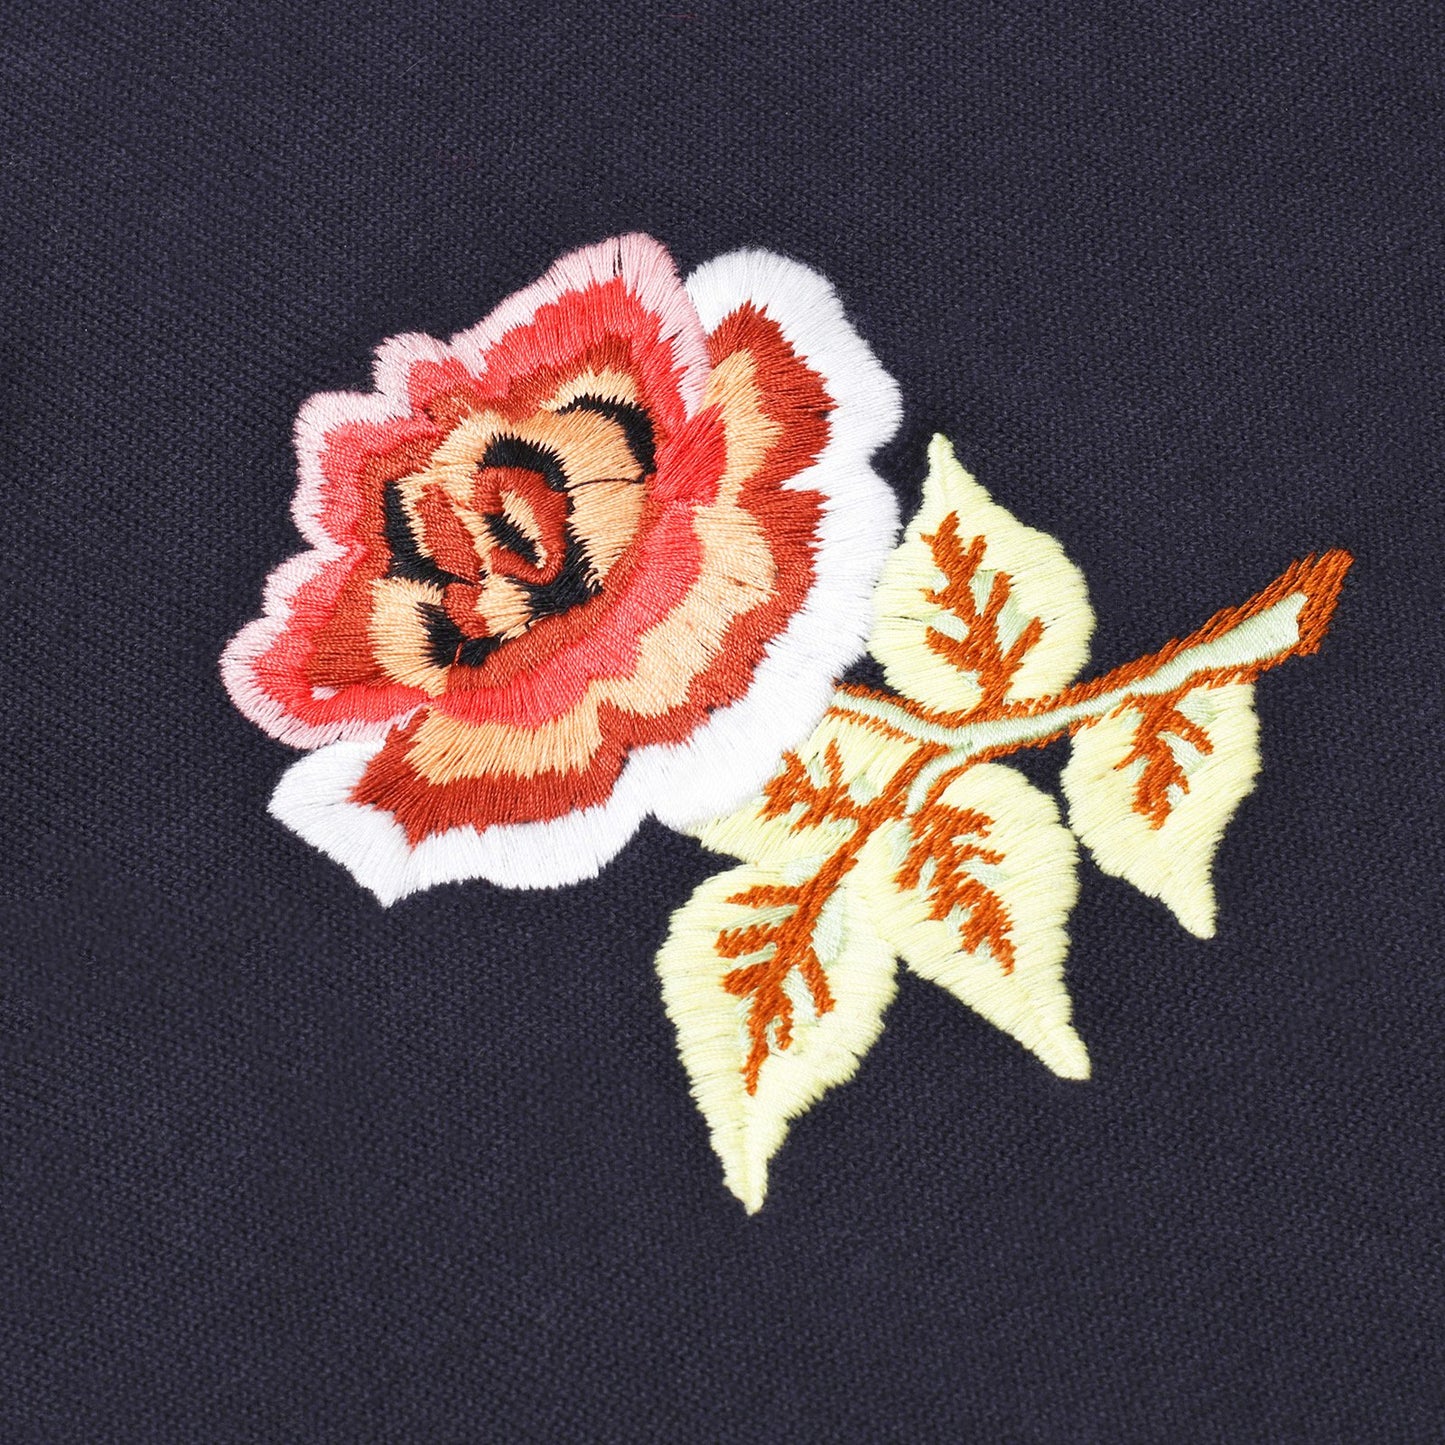 Intricately embroidered rose.